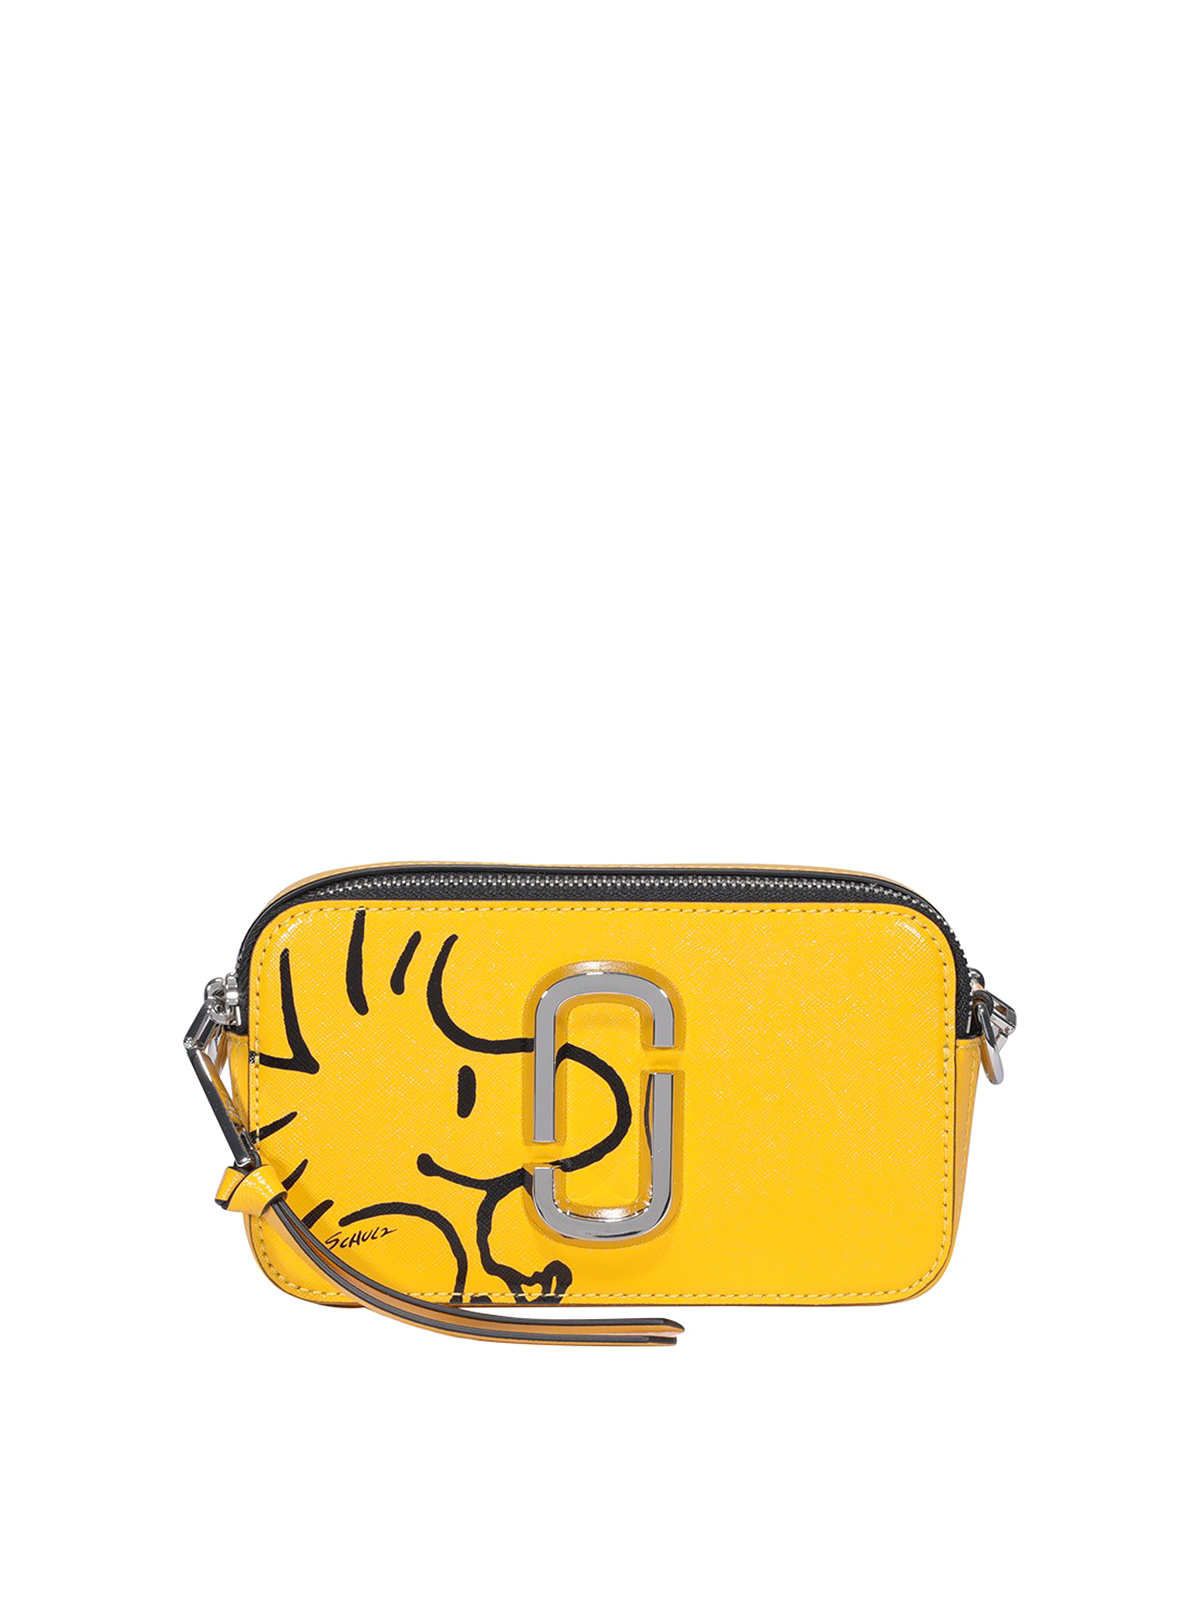 MARC JACOBS Peanuts x Marc Jacobs The Snapshot M0016815 NWT